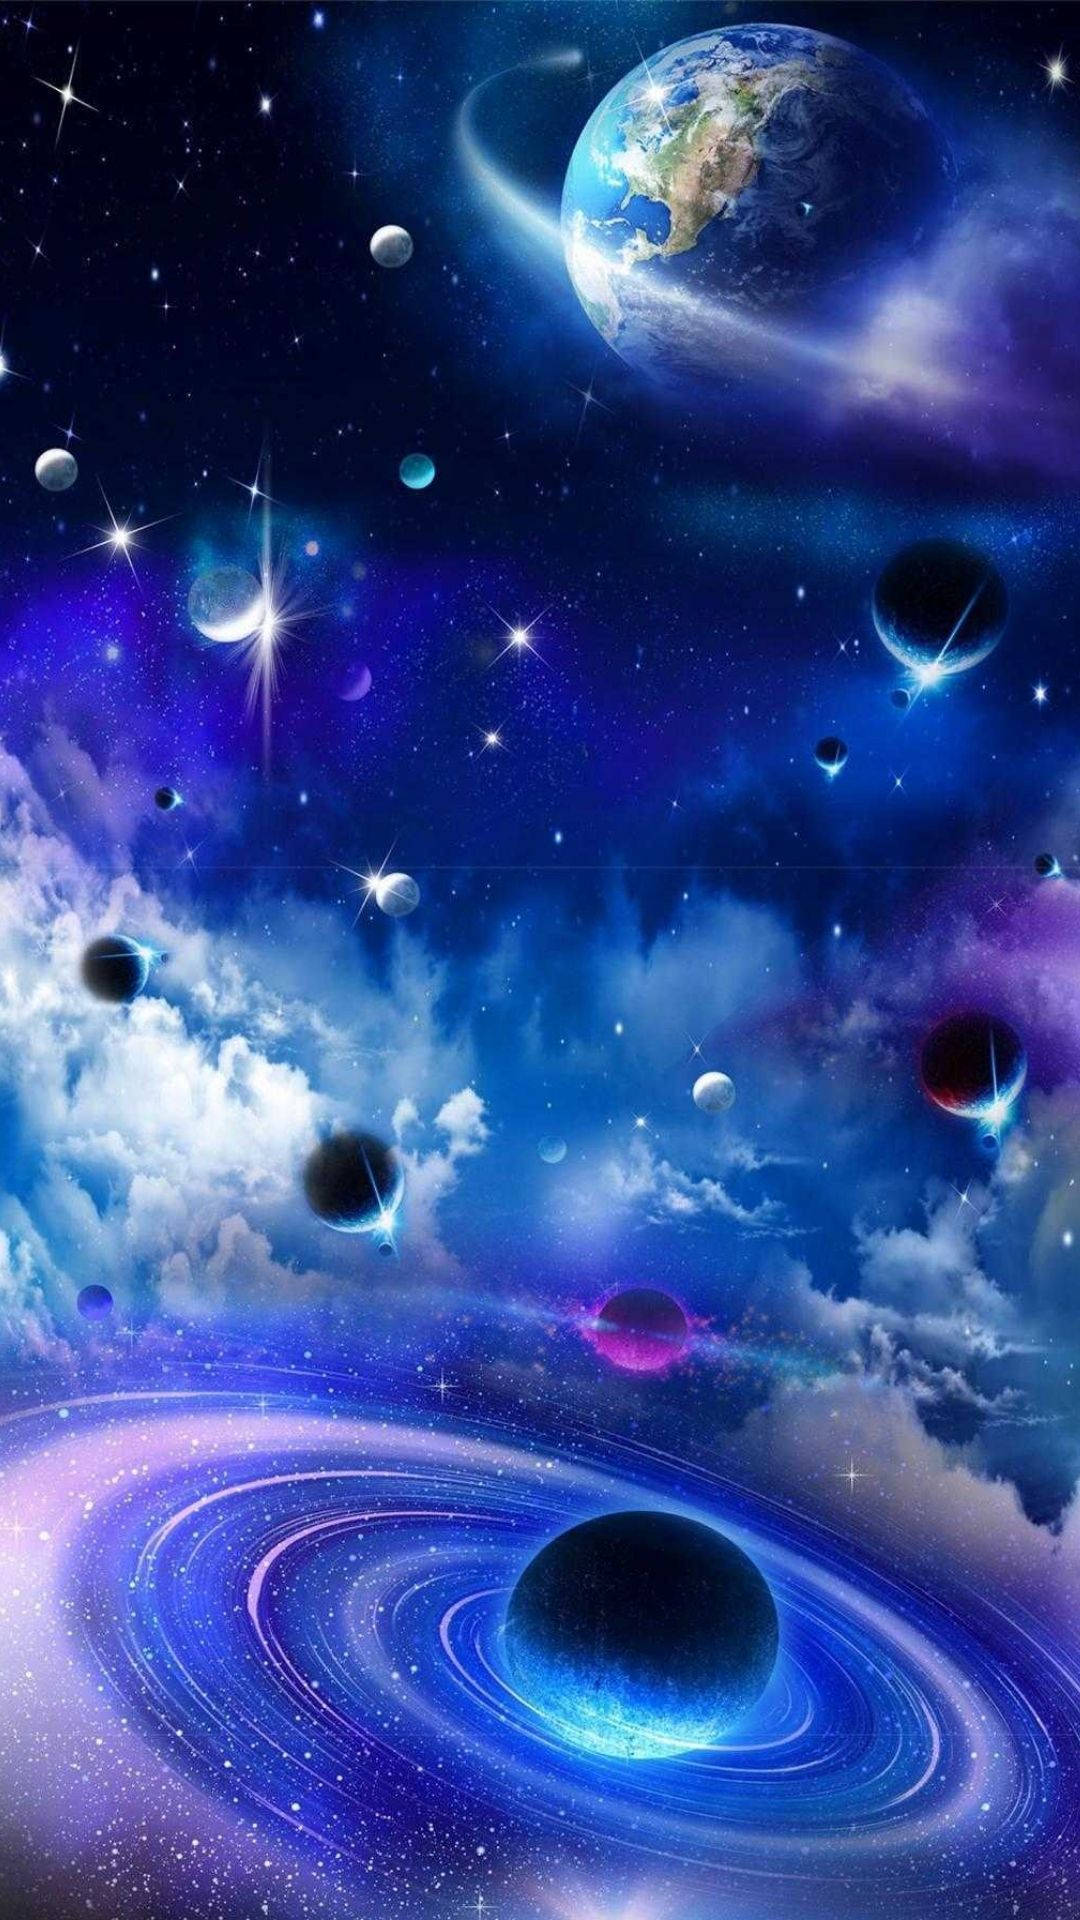 Galaxy Background With Falling Planets